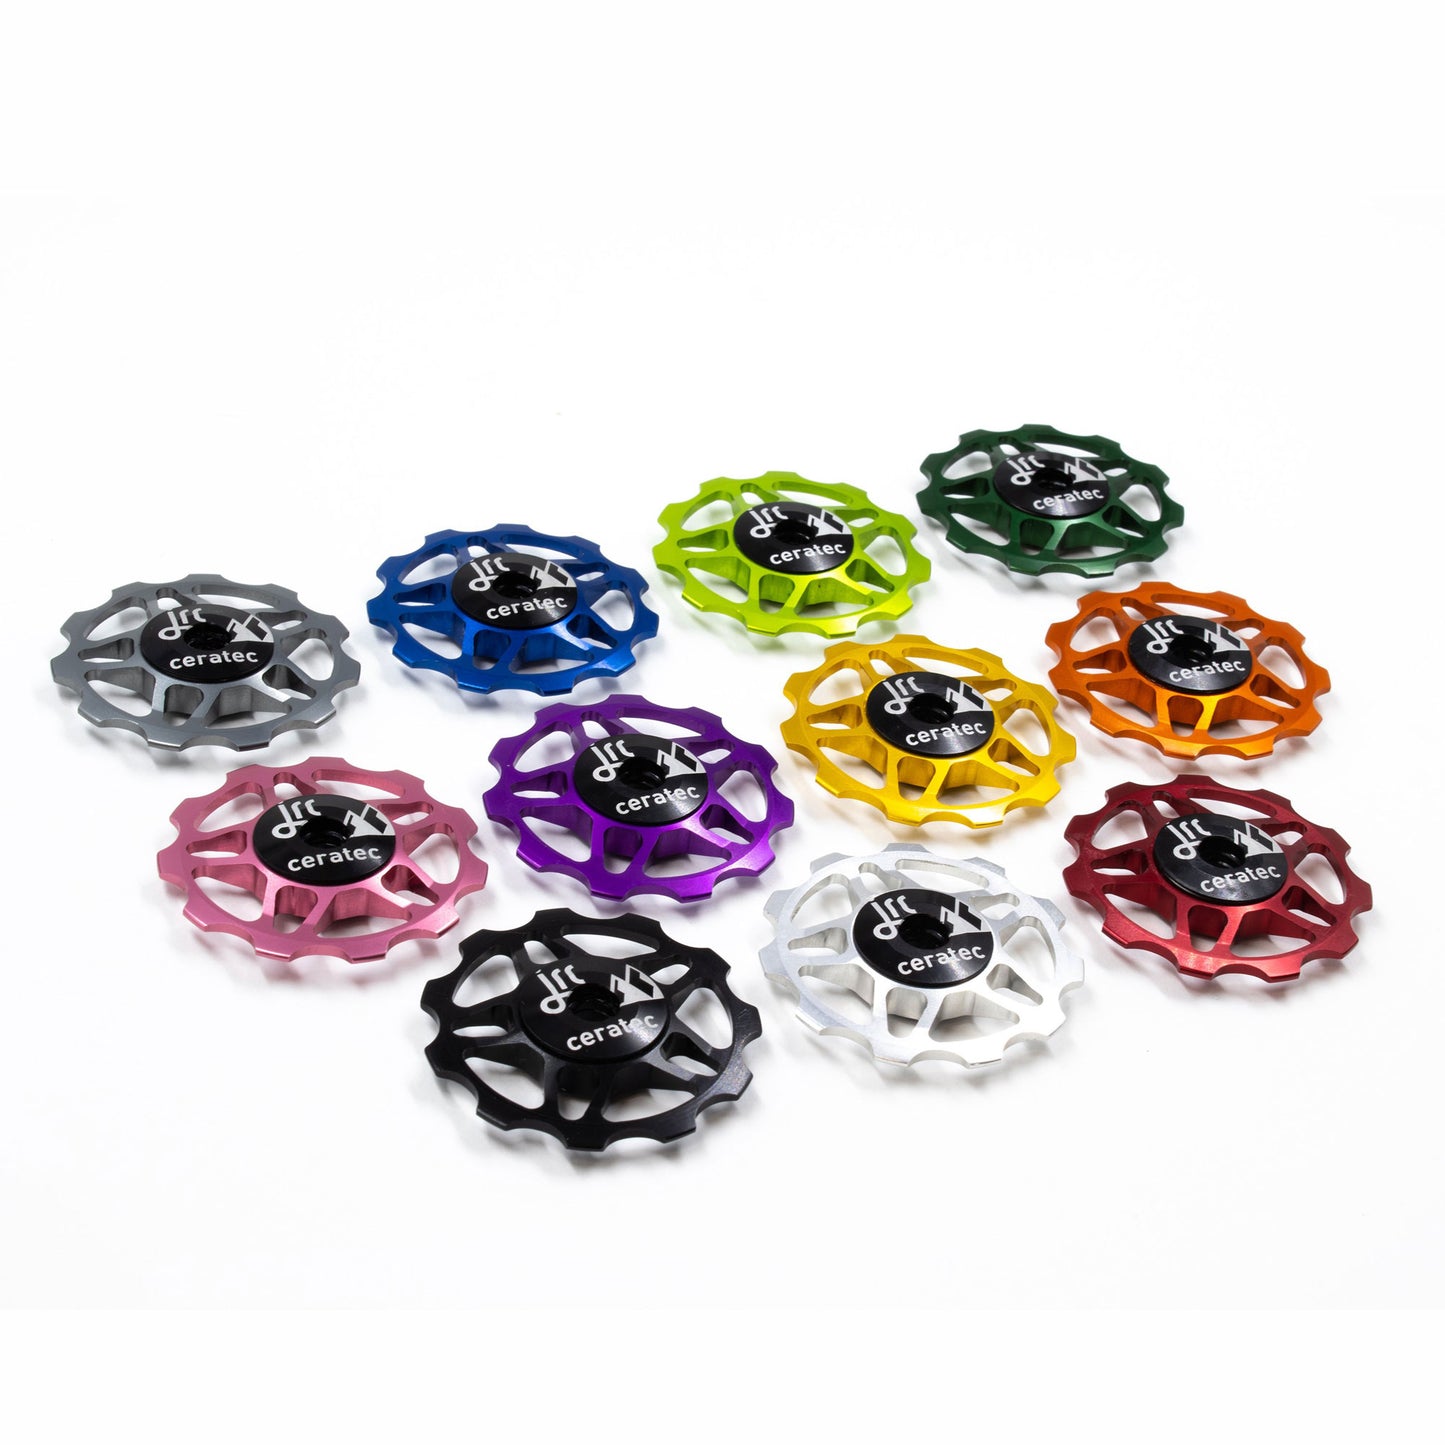 Lightweight aluminium 11 tooth pulley wheel set for bicycles, for Shimano SRAM and Campagnolo, various colours